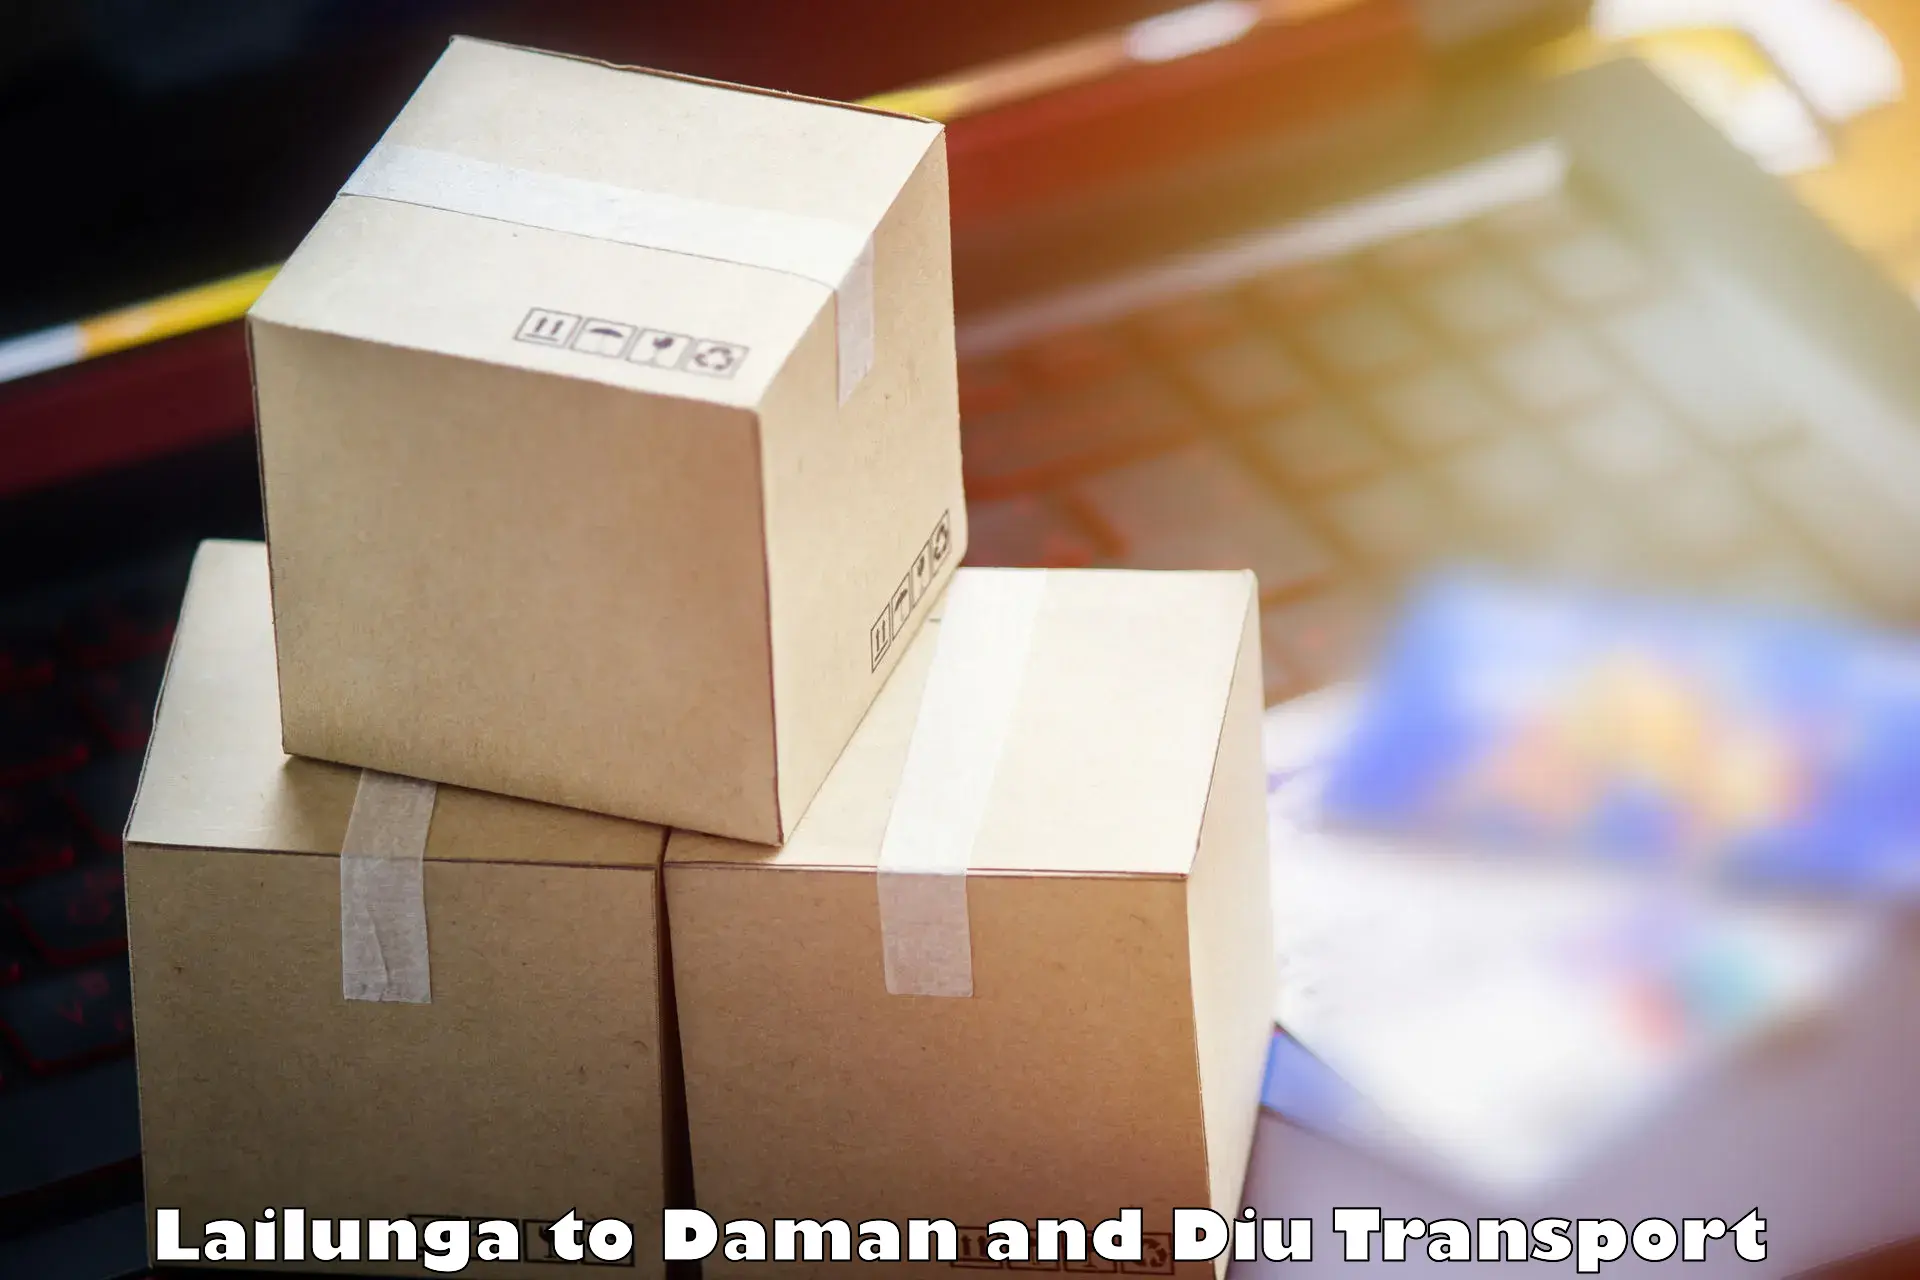 Container transportation services Lailunga to Daman and Diu